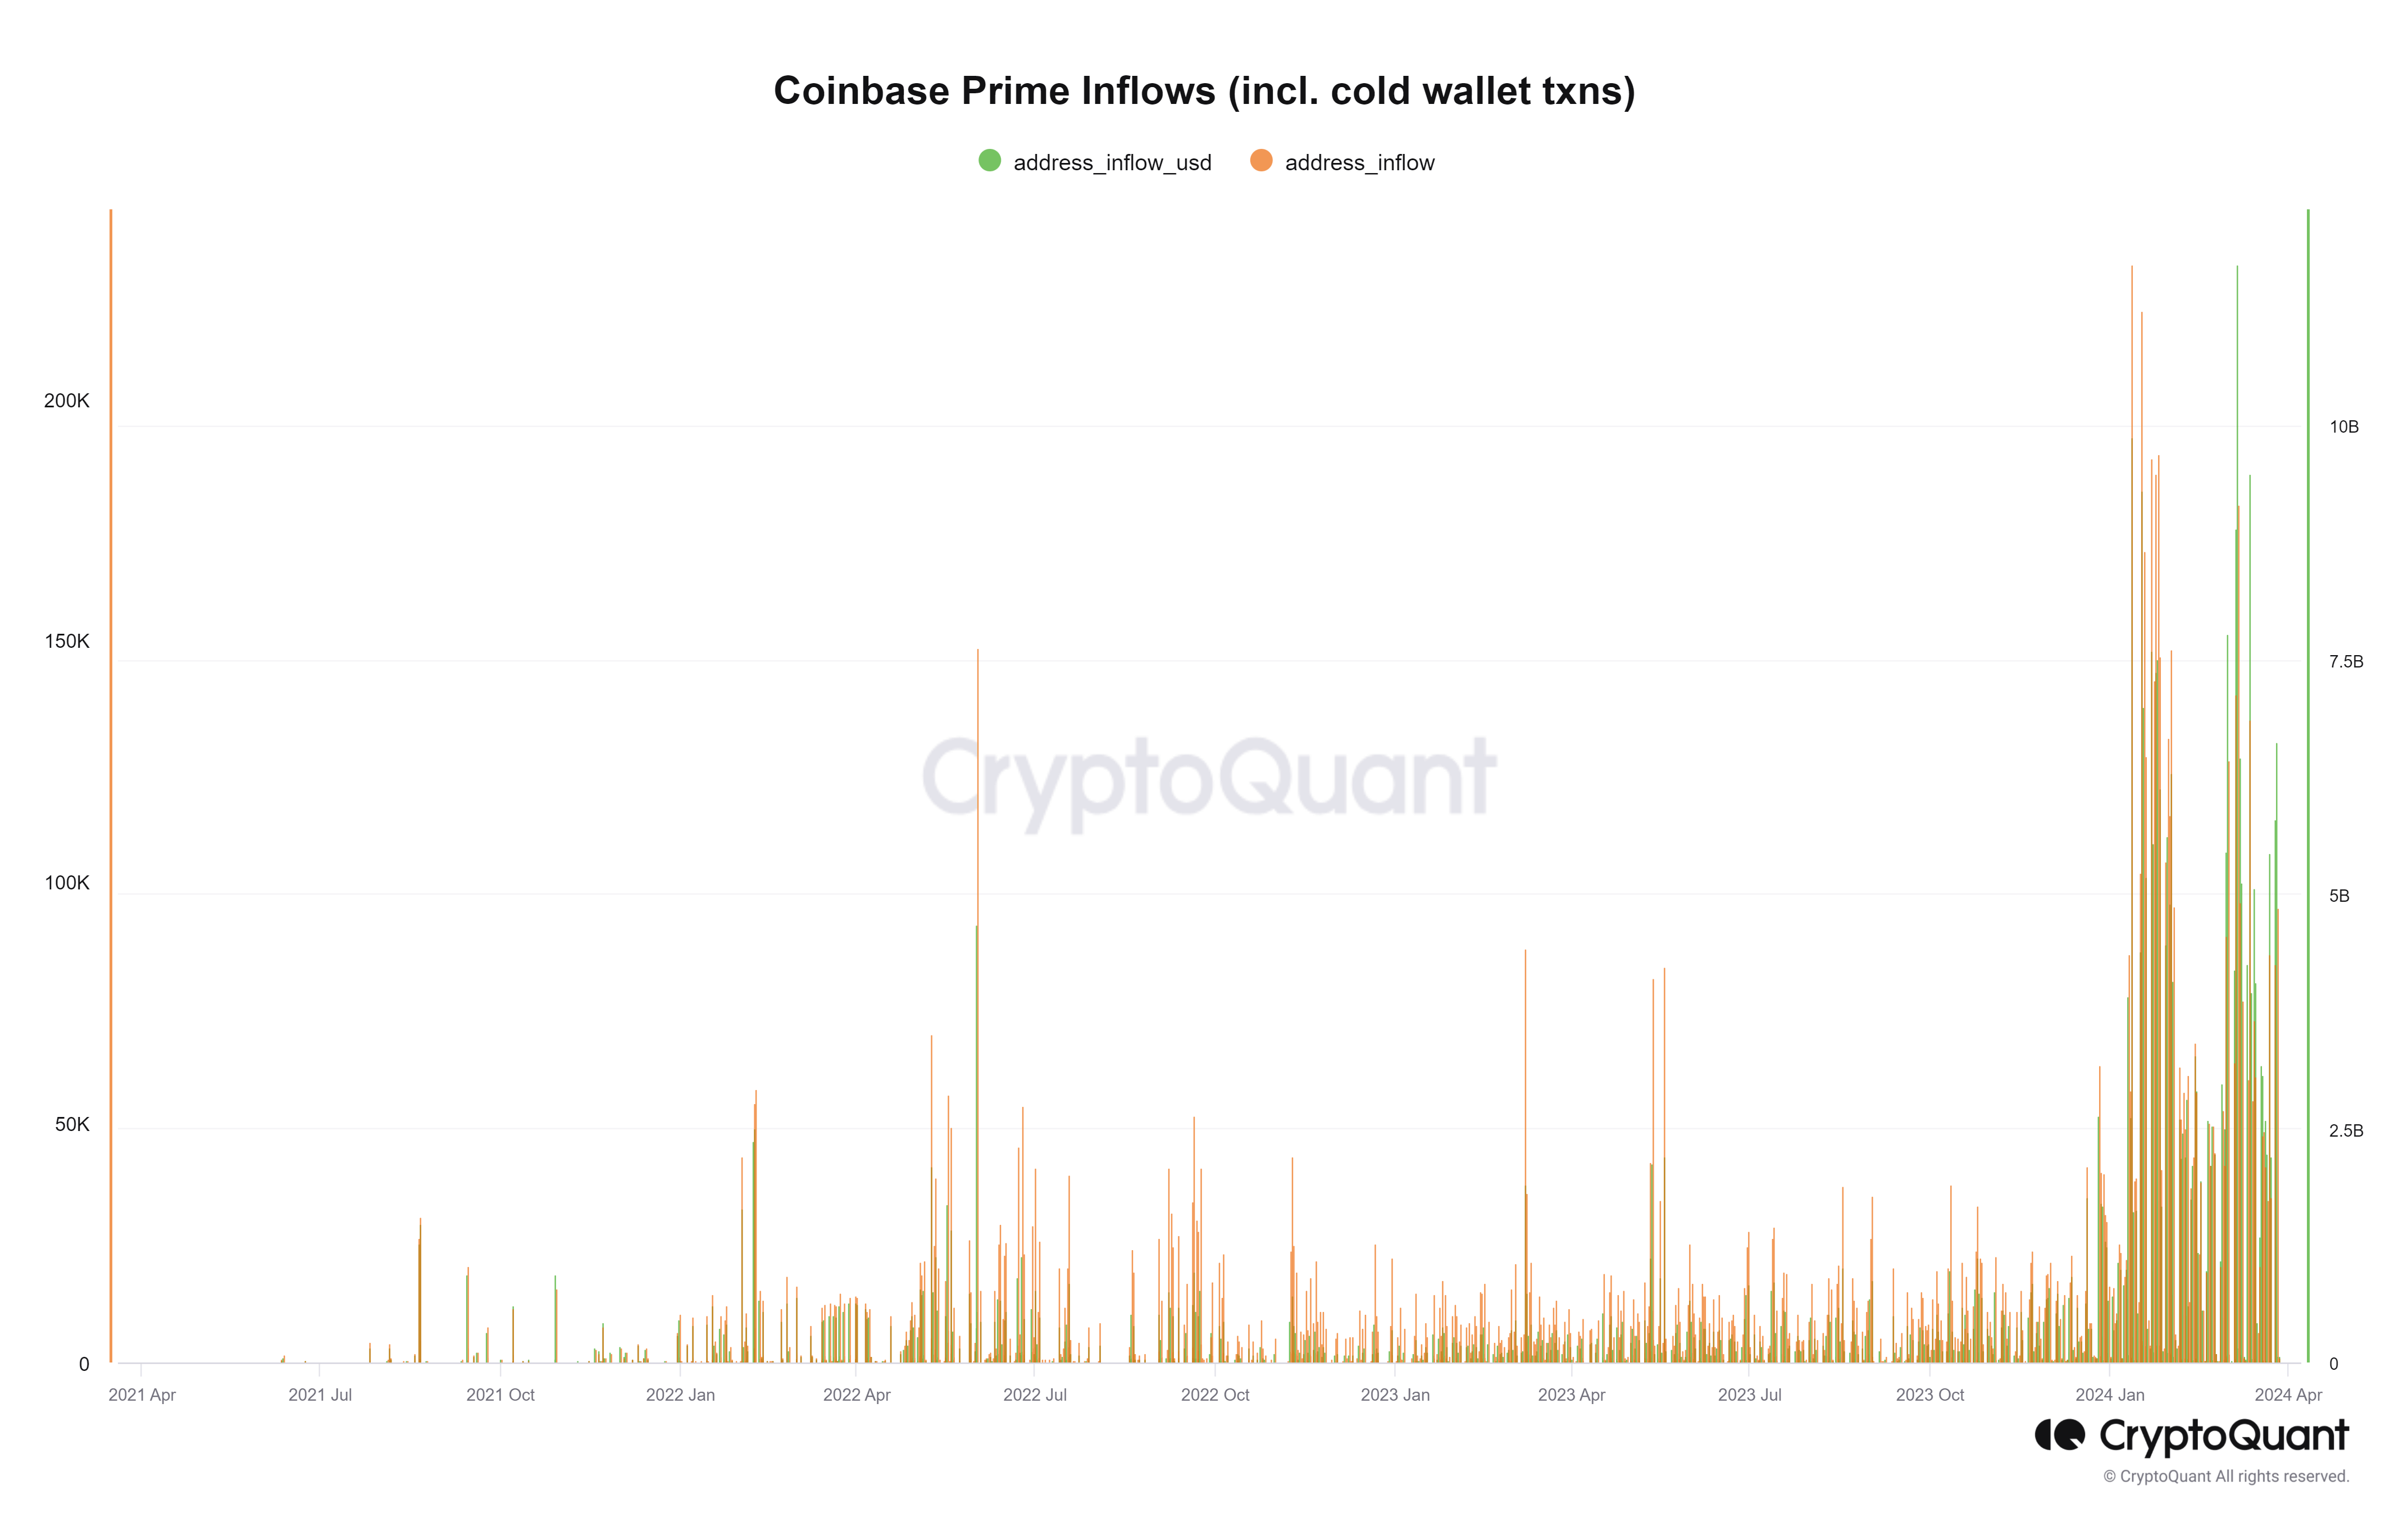 Coinbase Prime Inflows (inkl. kale Portemonnaie txns)